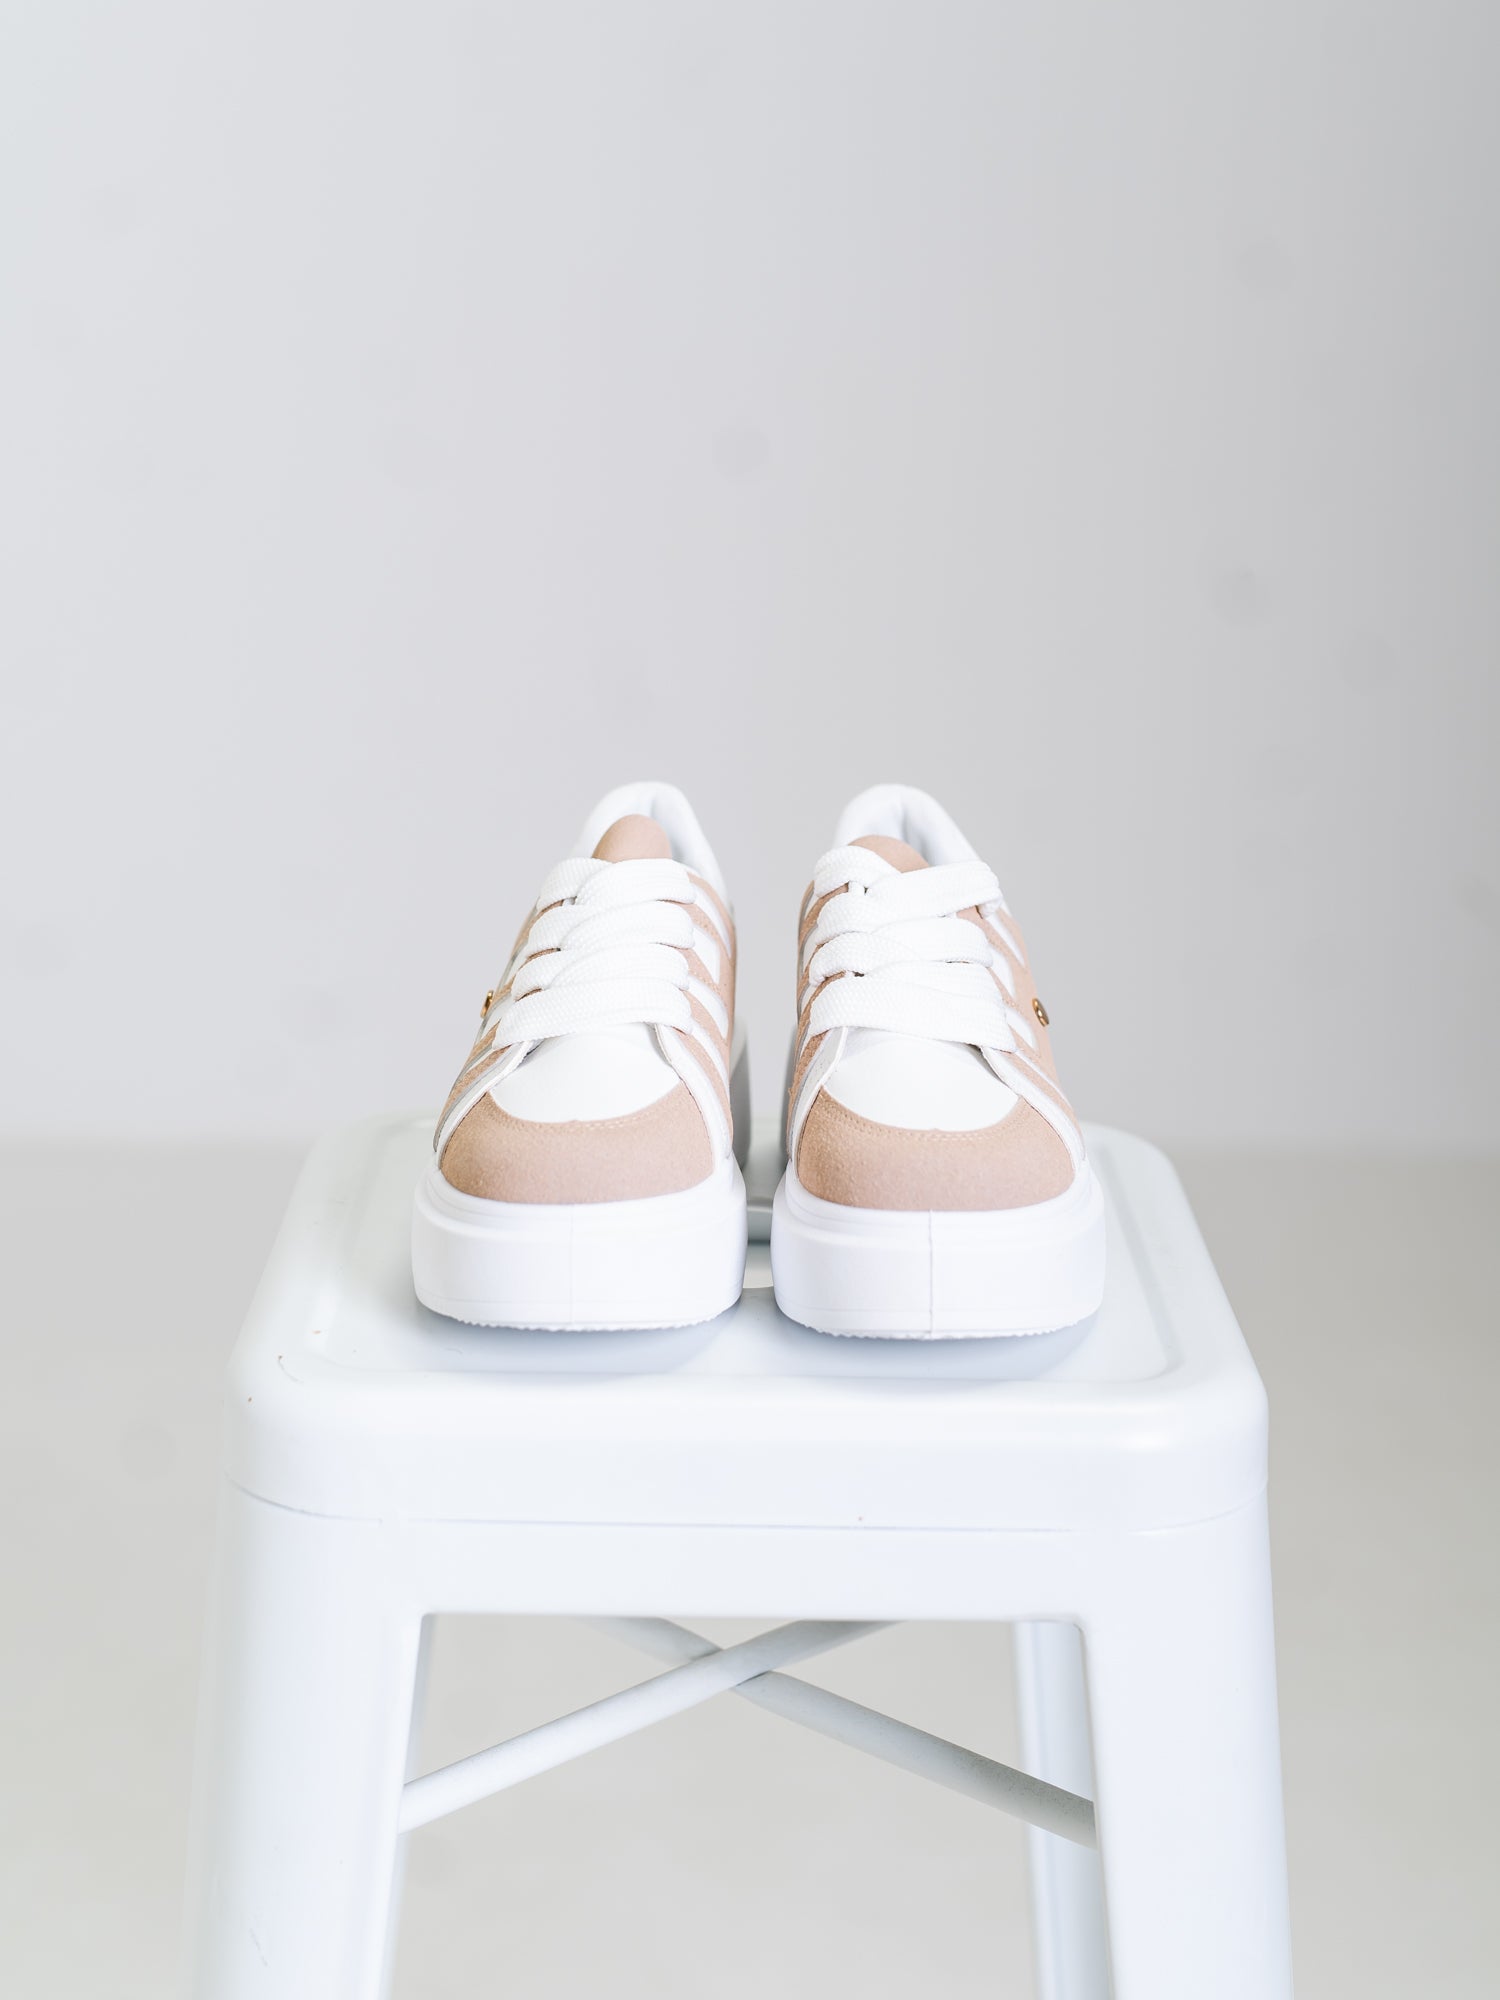 Go On Sneakers - Weiß/Taupe